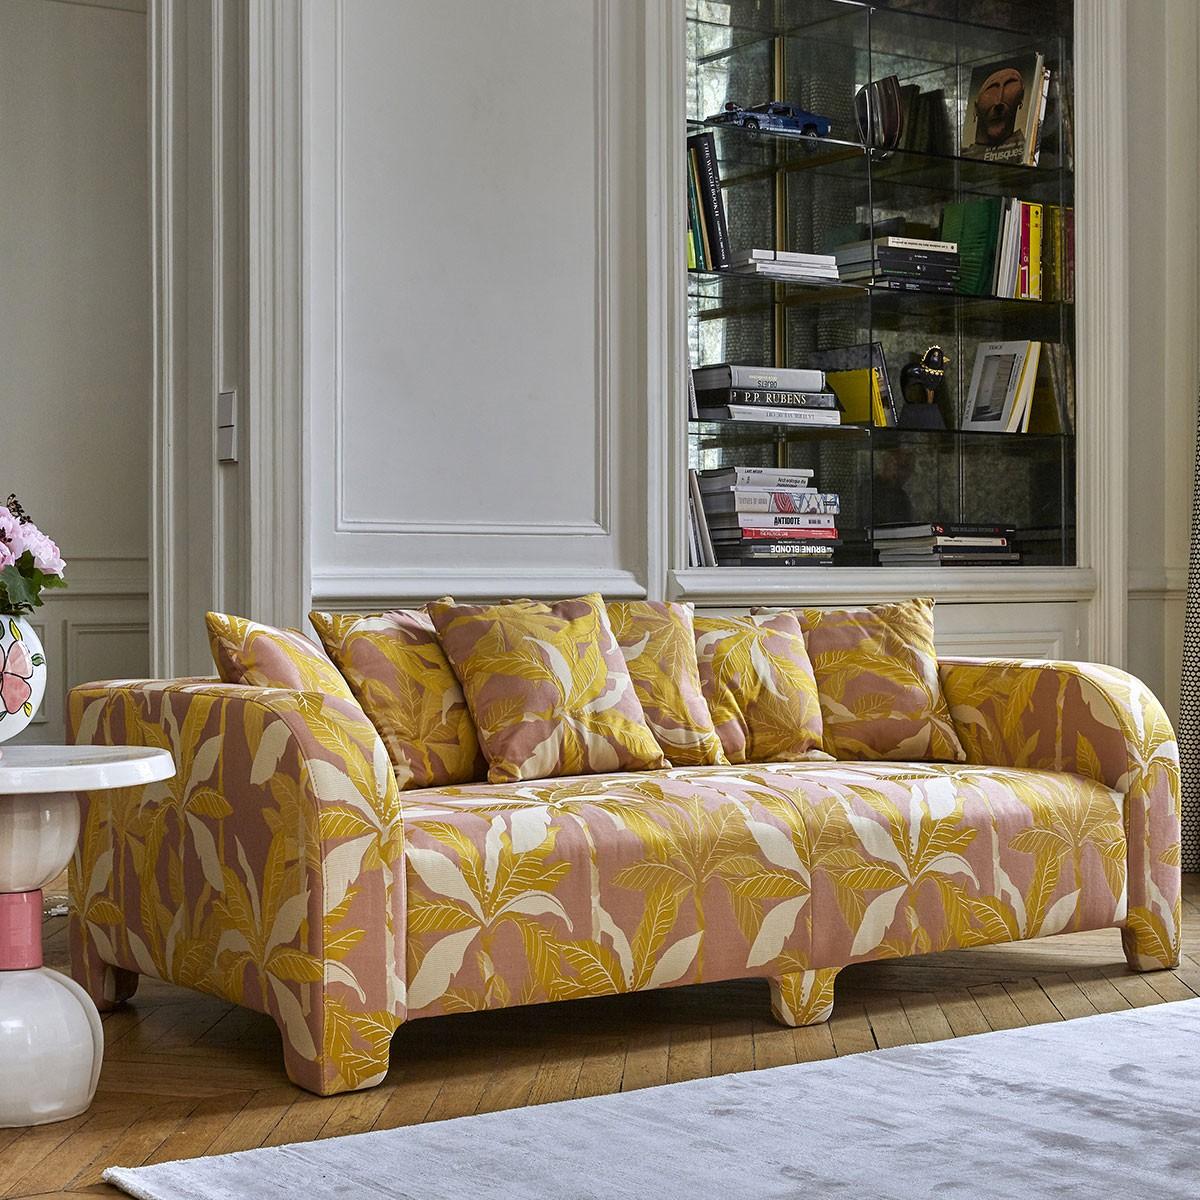 Popus Editions Graziella 4 seater sofa in pink verone velvet upholstery

A foot that hides another. A cushion that hides another. A curve that hides another with contemporary lines and a base like a punctuation mark, this sofa gives pride of place